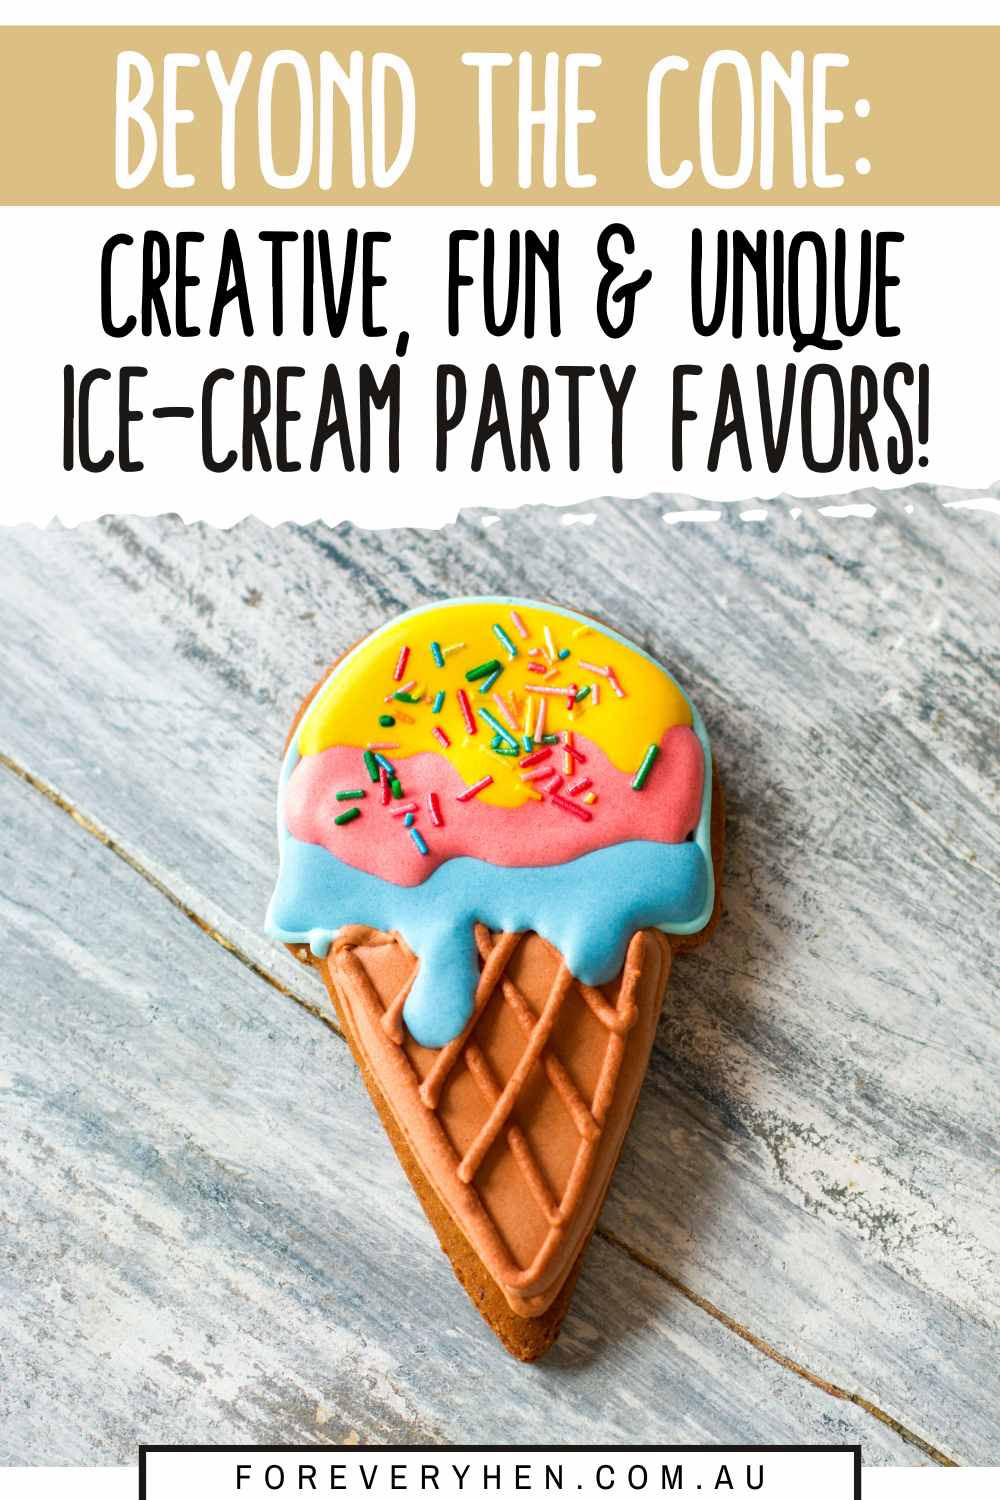 Image of a biscuit shaped and decorated like an ice-cream. Text overlay: Beyond the cone - creative, fun and unique ice-cream party favors!